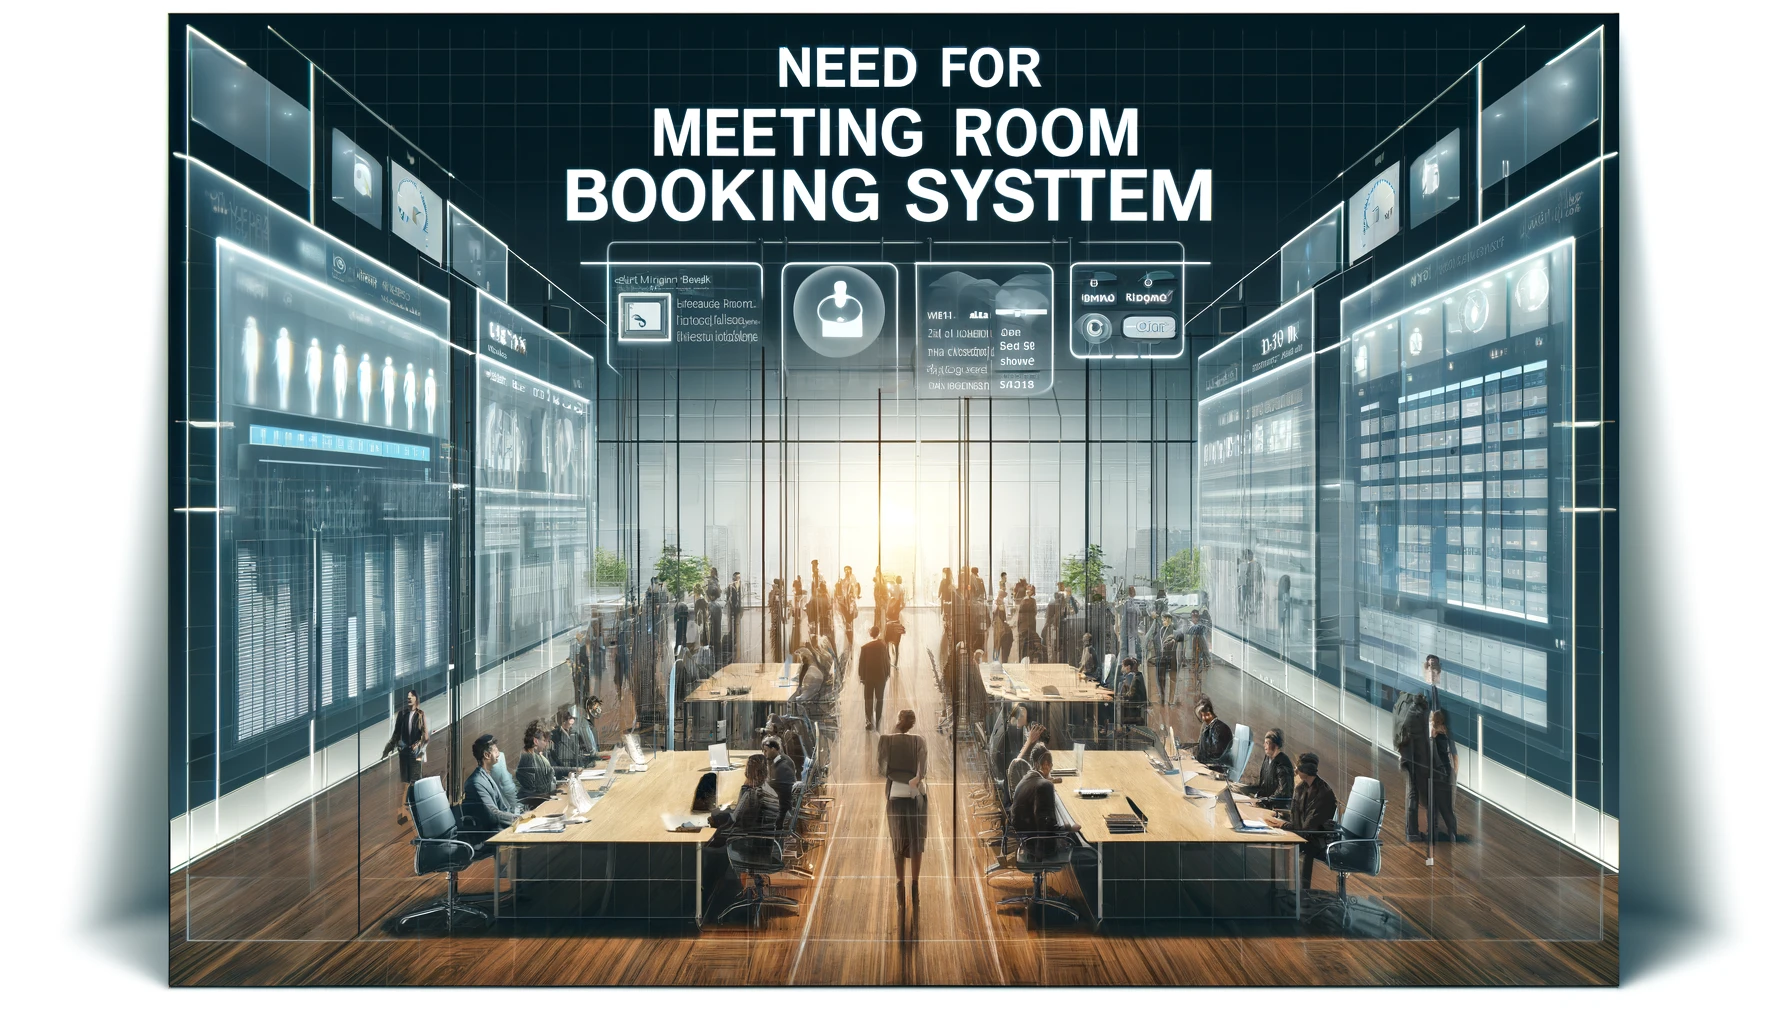 Need for Meeting Room Booking System